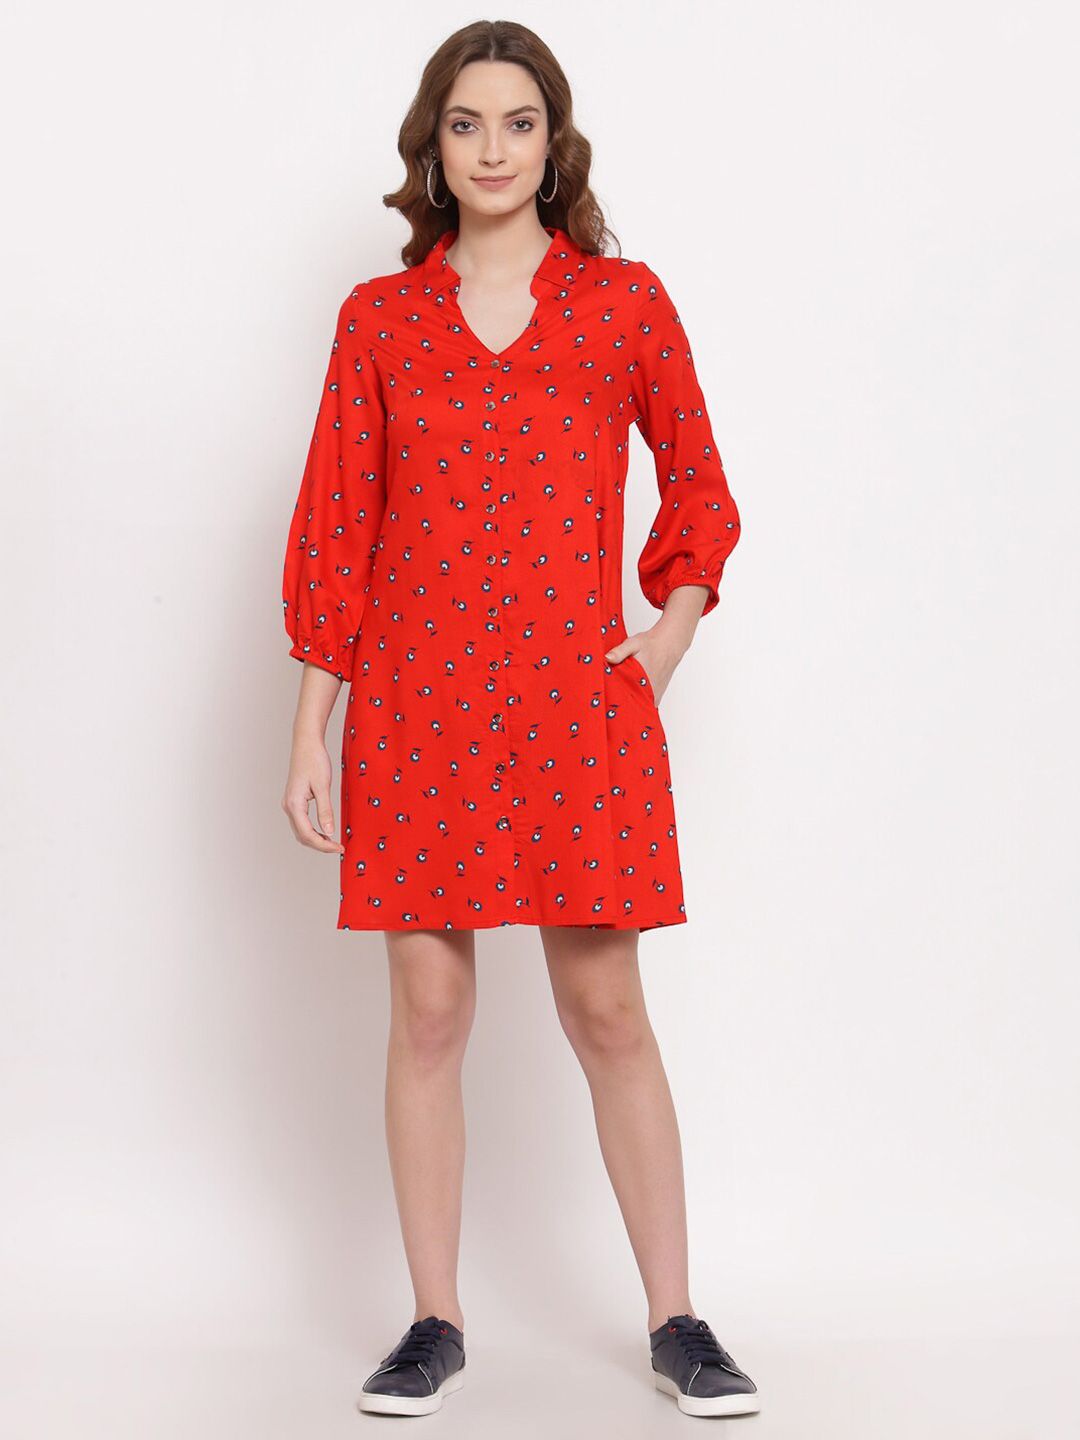 TERQUOIS Women Red & Blue Floral Printed Shirt Dress Price in India